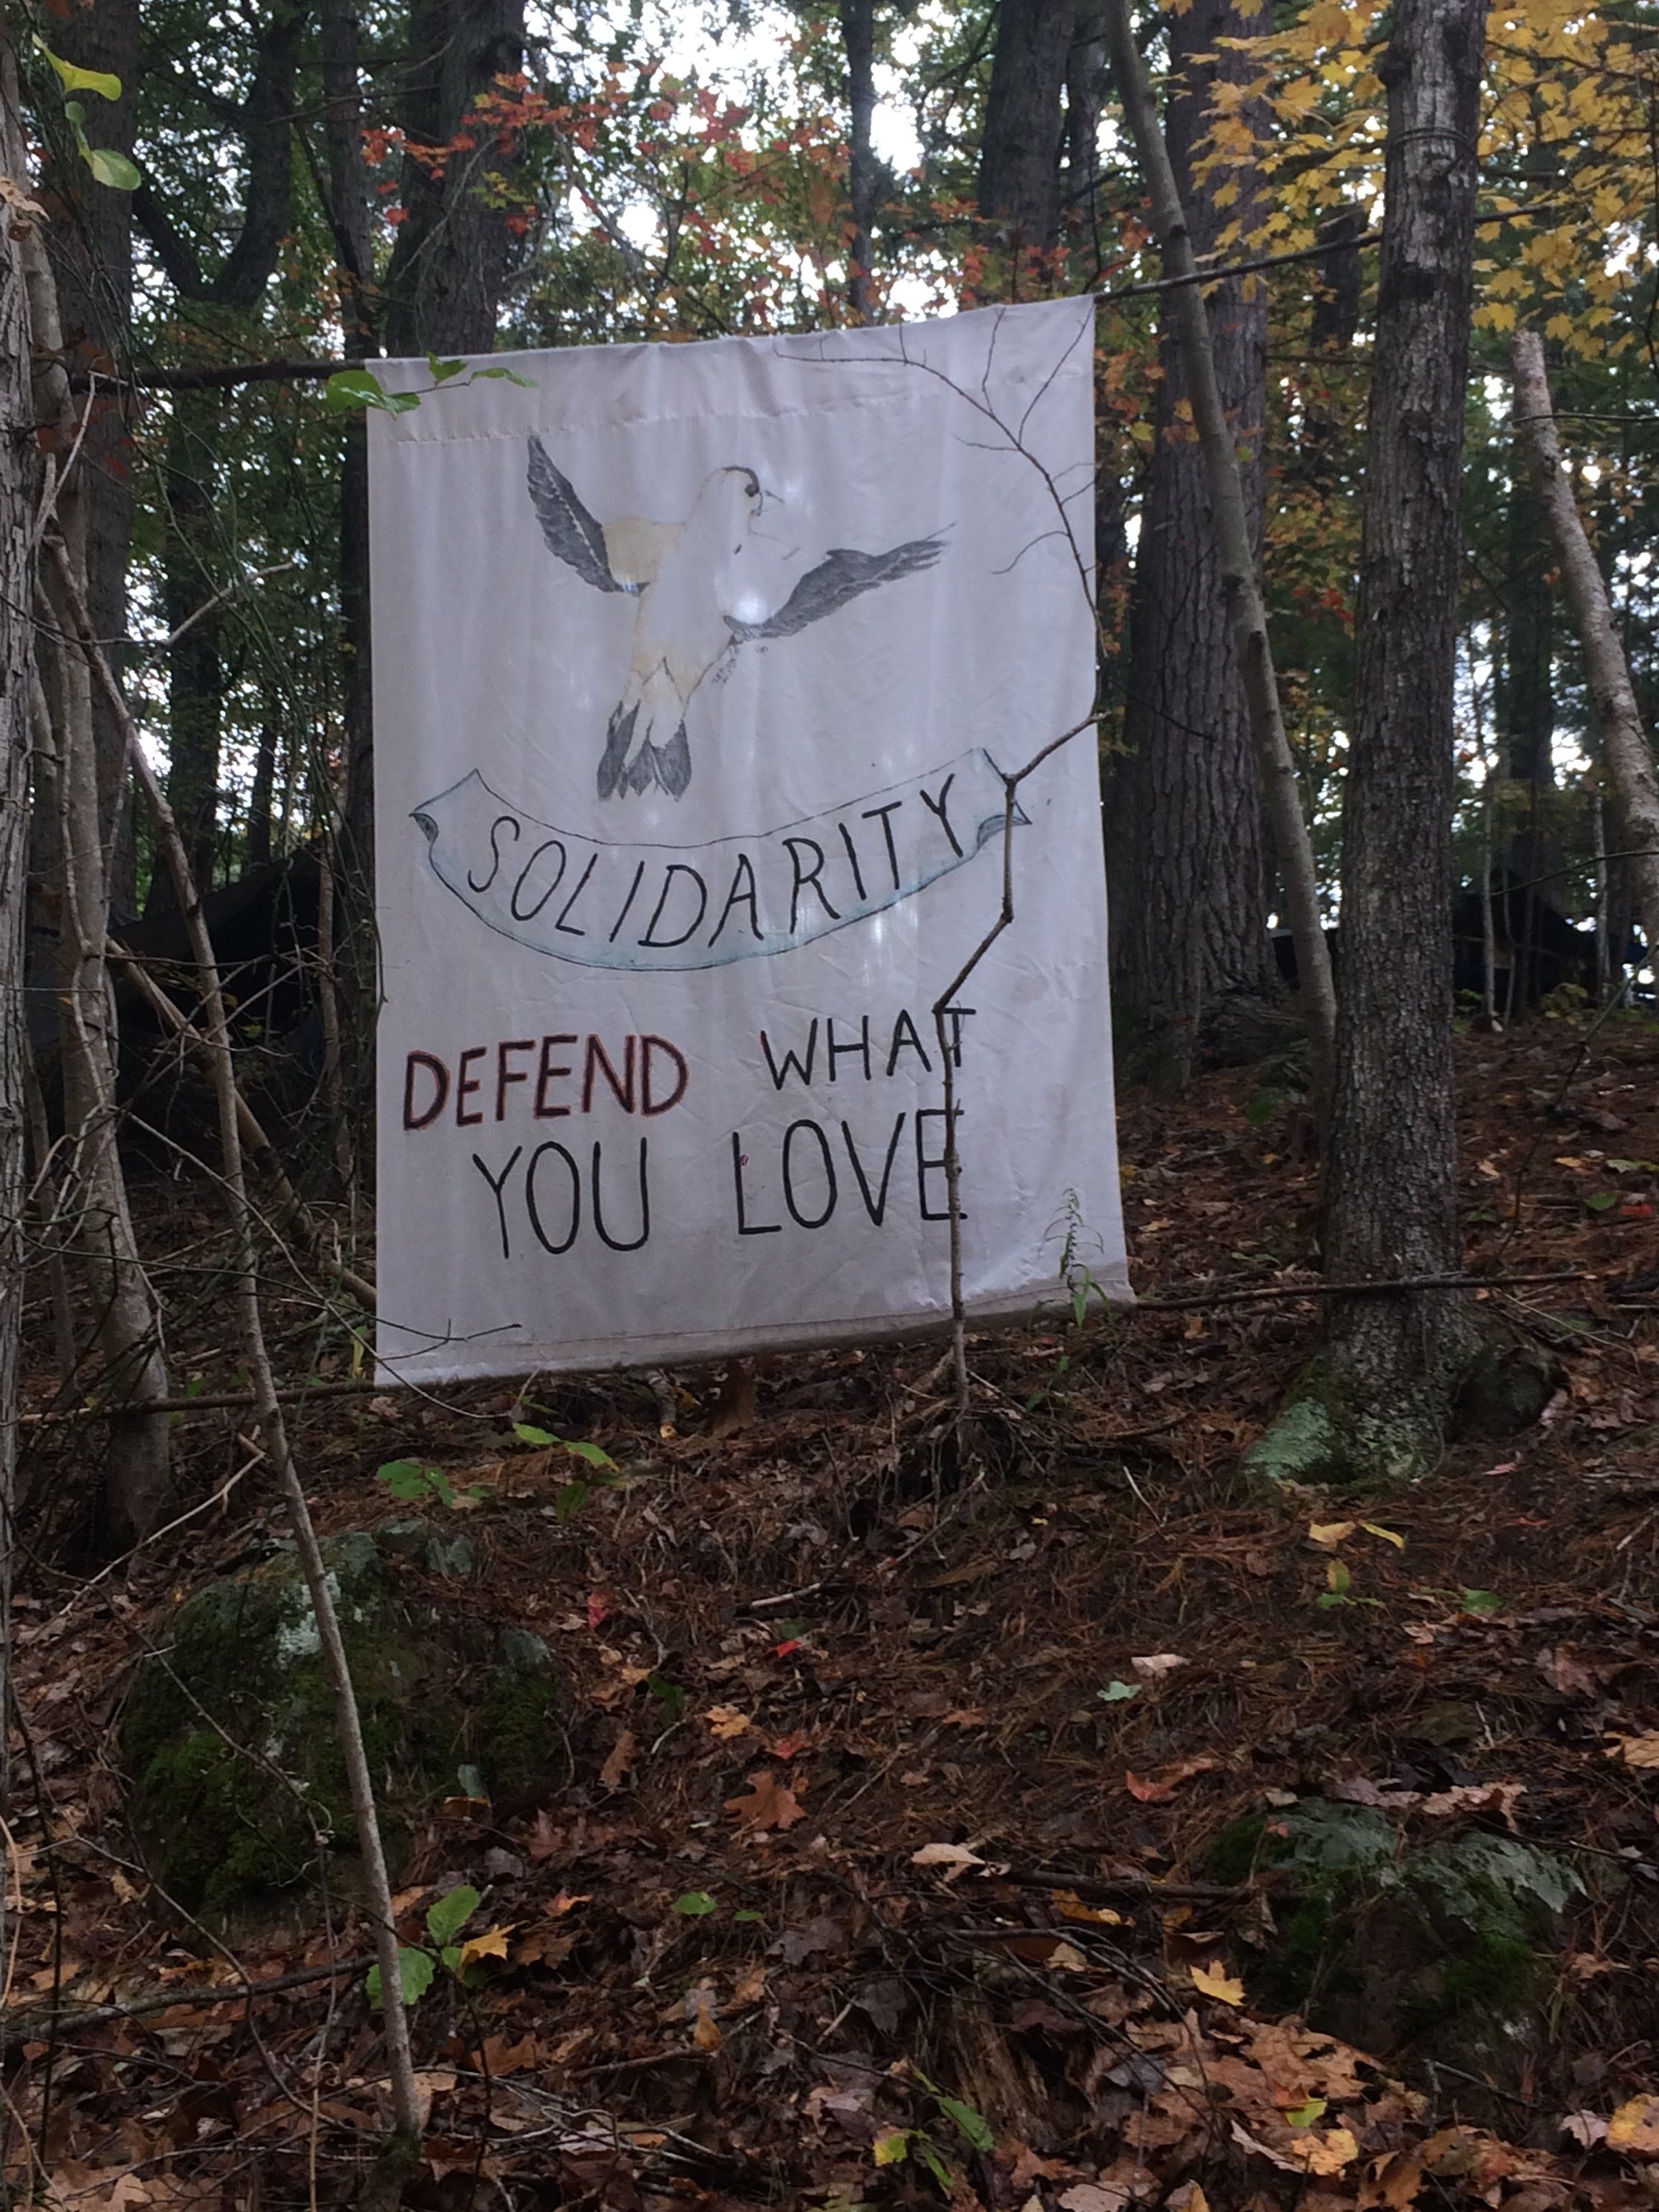 A handmade banner hanging among trees reading “Solidarity Defend What You Love” with a yellow finch along Yellow Finch Road. Image by Kelsey Wright. United States, 2019.